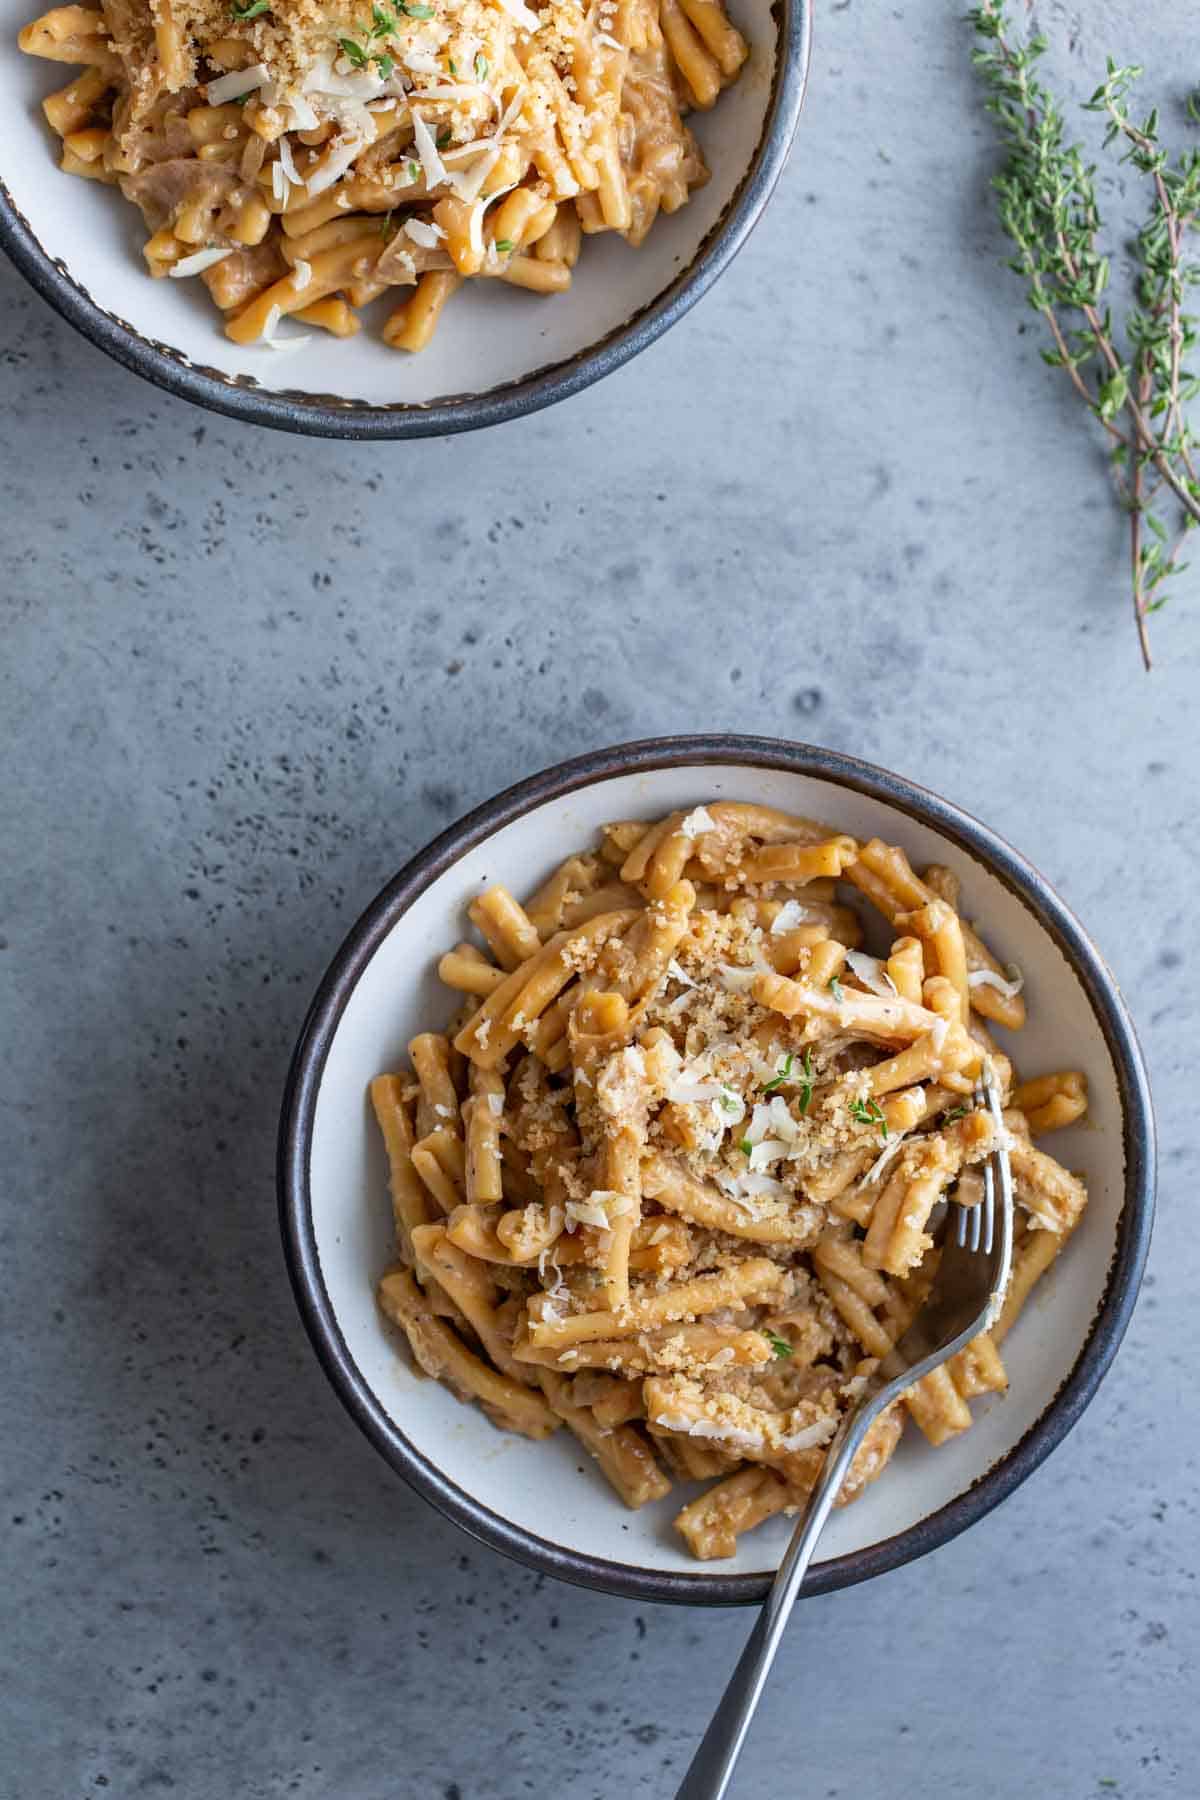 Two bowls of creamy pasta topped with grated cheese and herbs on a gray surface.